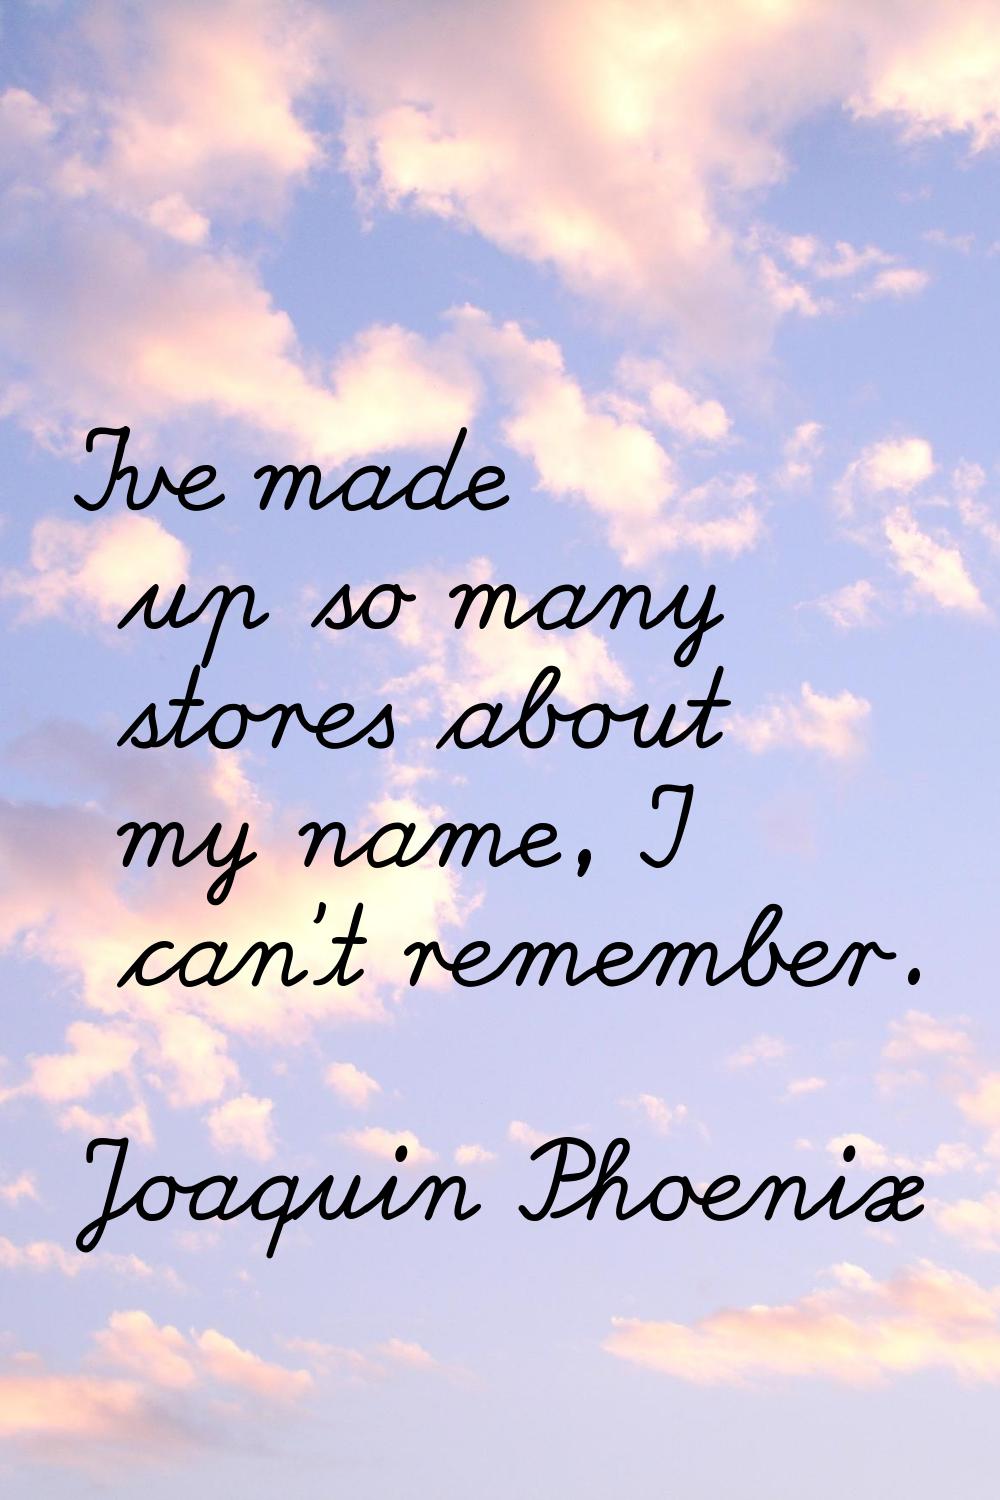 I've made up so many stores about my name, I can't remember.